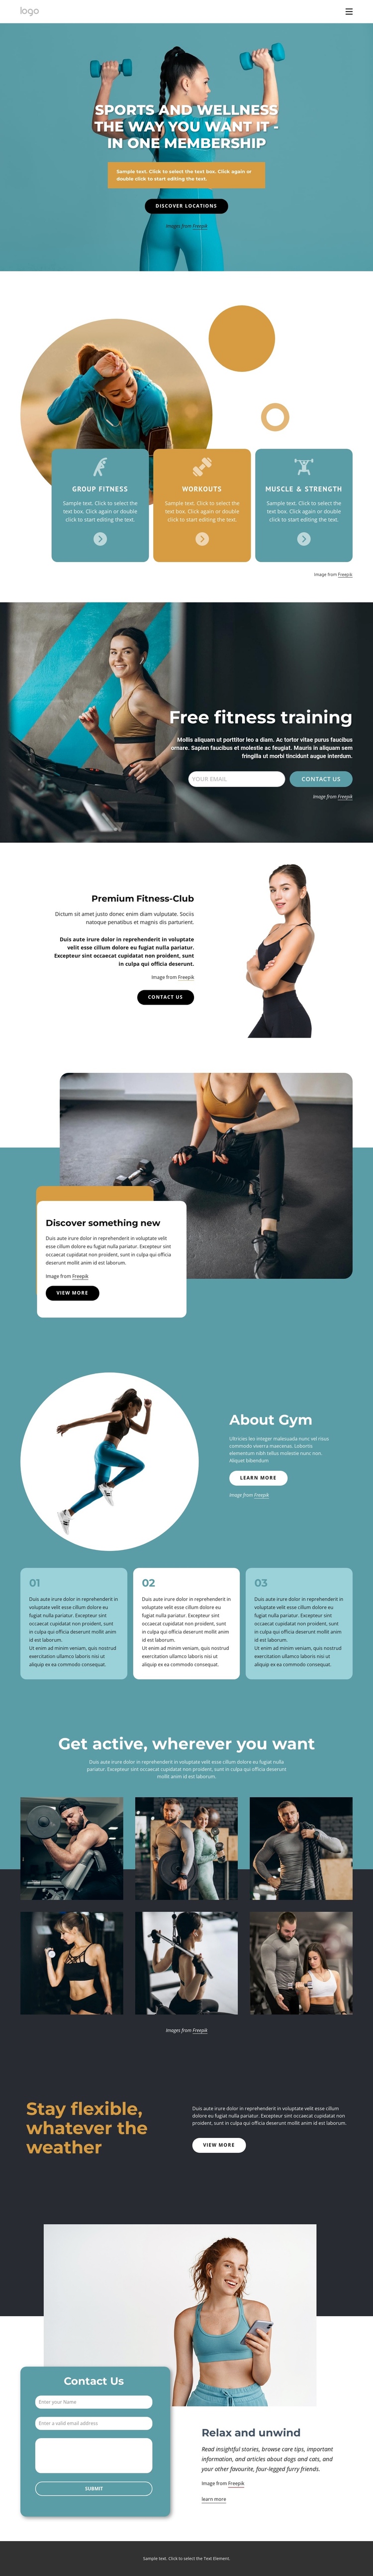 Workout anywhere with one membership Website Builder Software